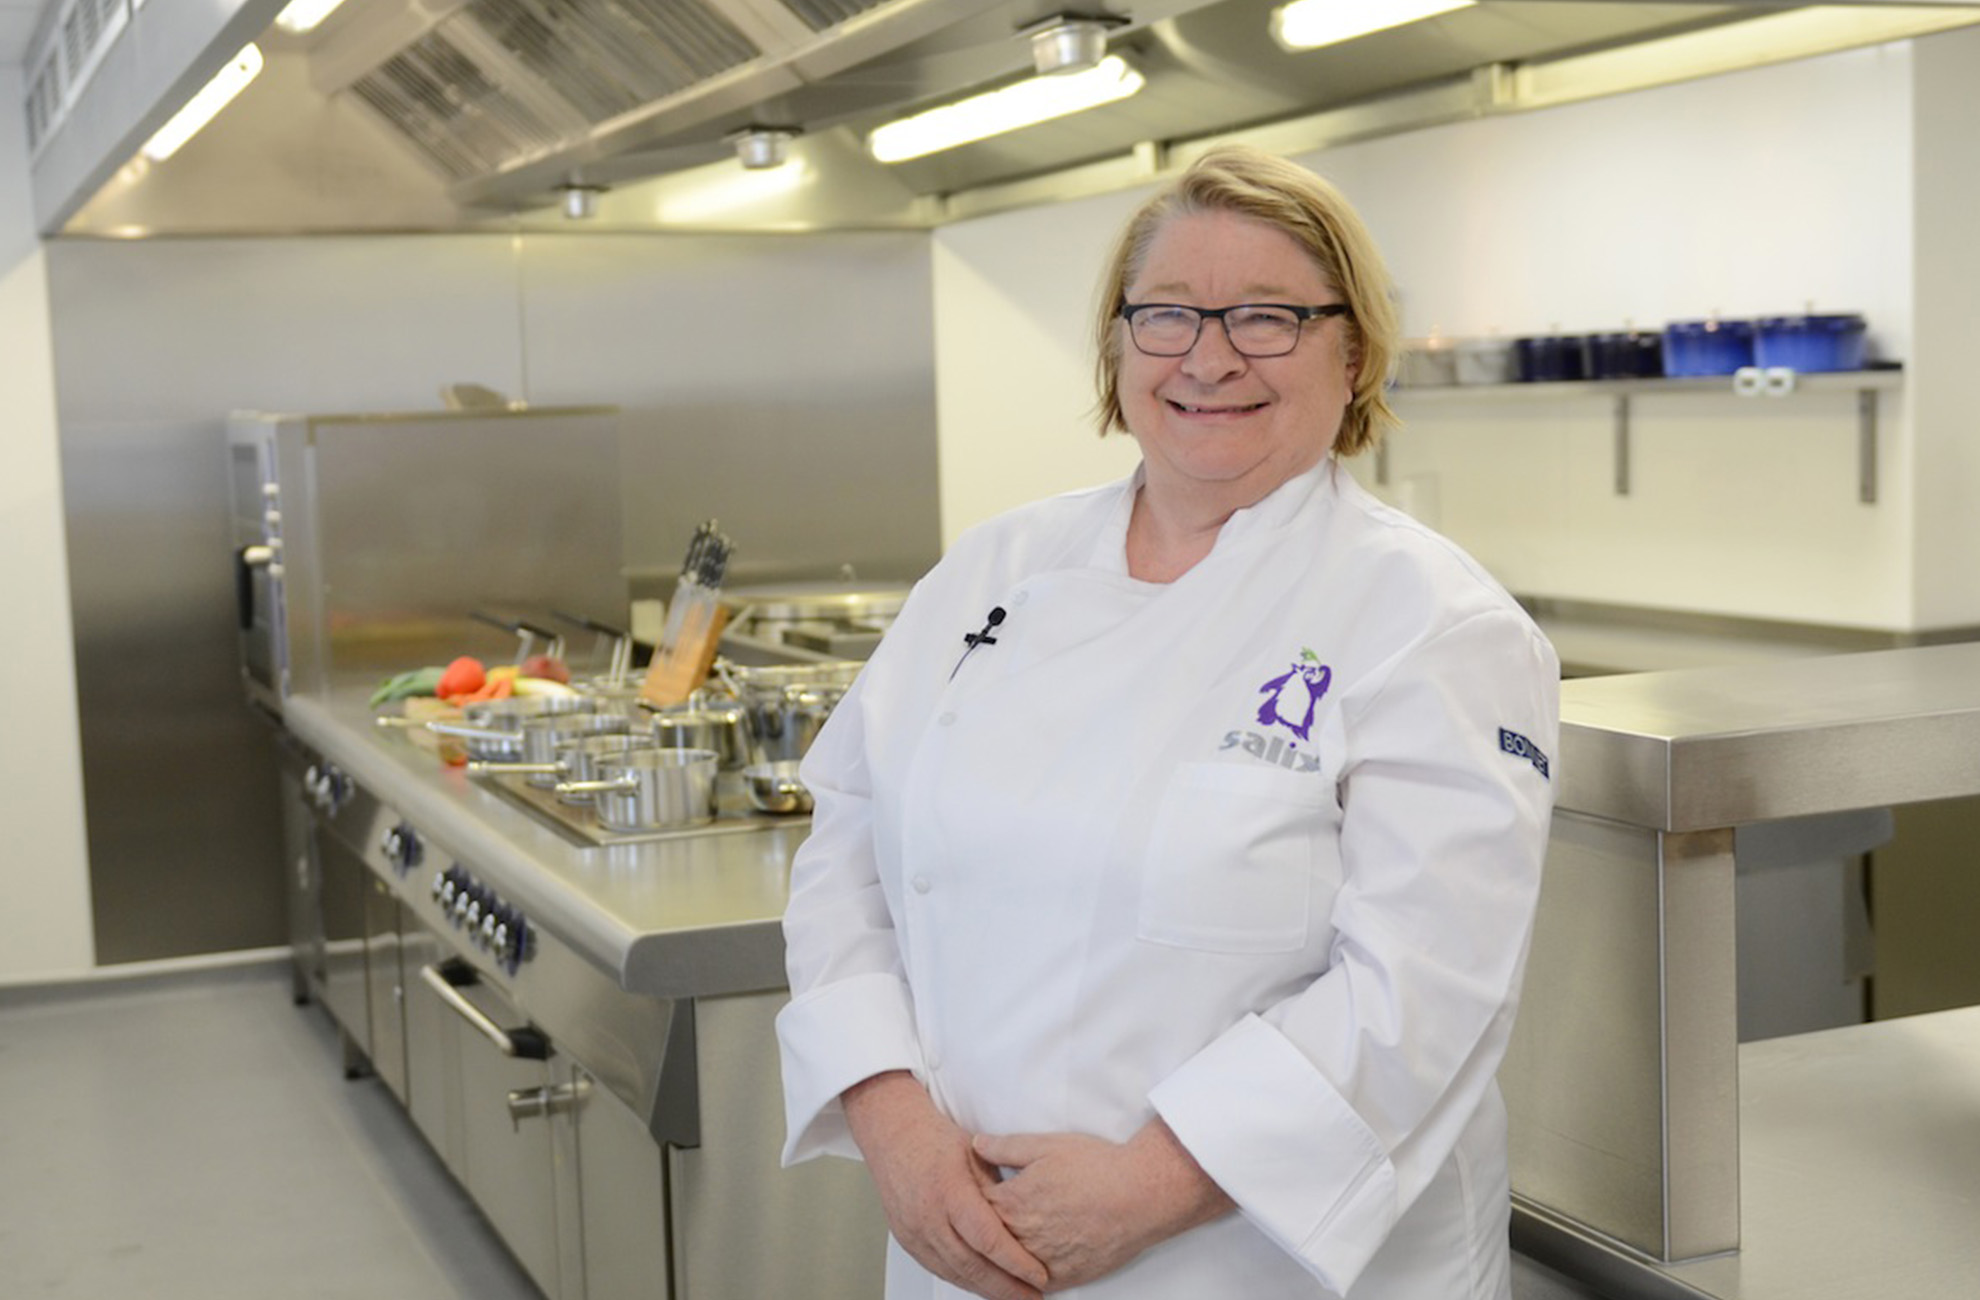 Rosemary Shrager will be hosting two cookery demonstrations at Whitchurch Food Festival which is sponsored by Combermere Abbey